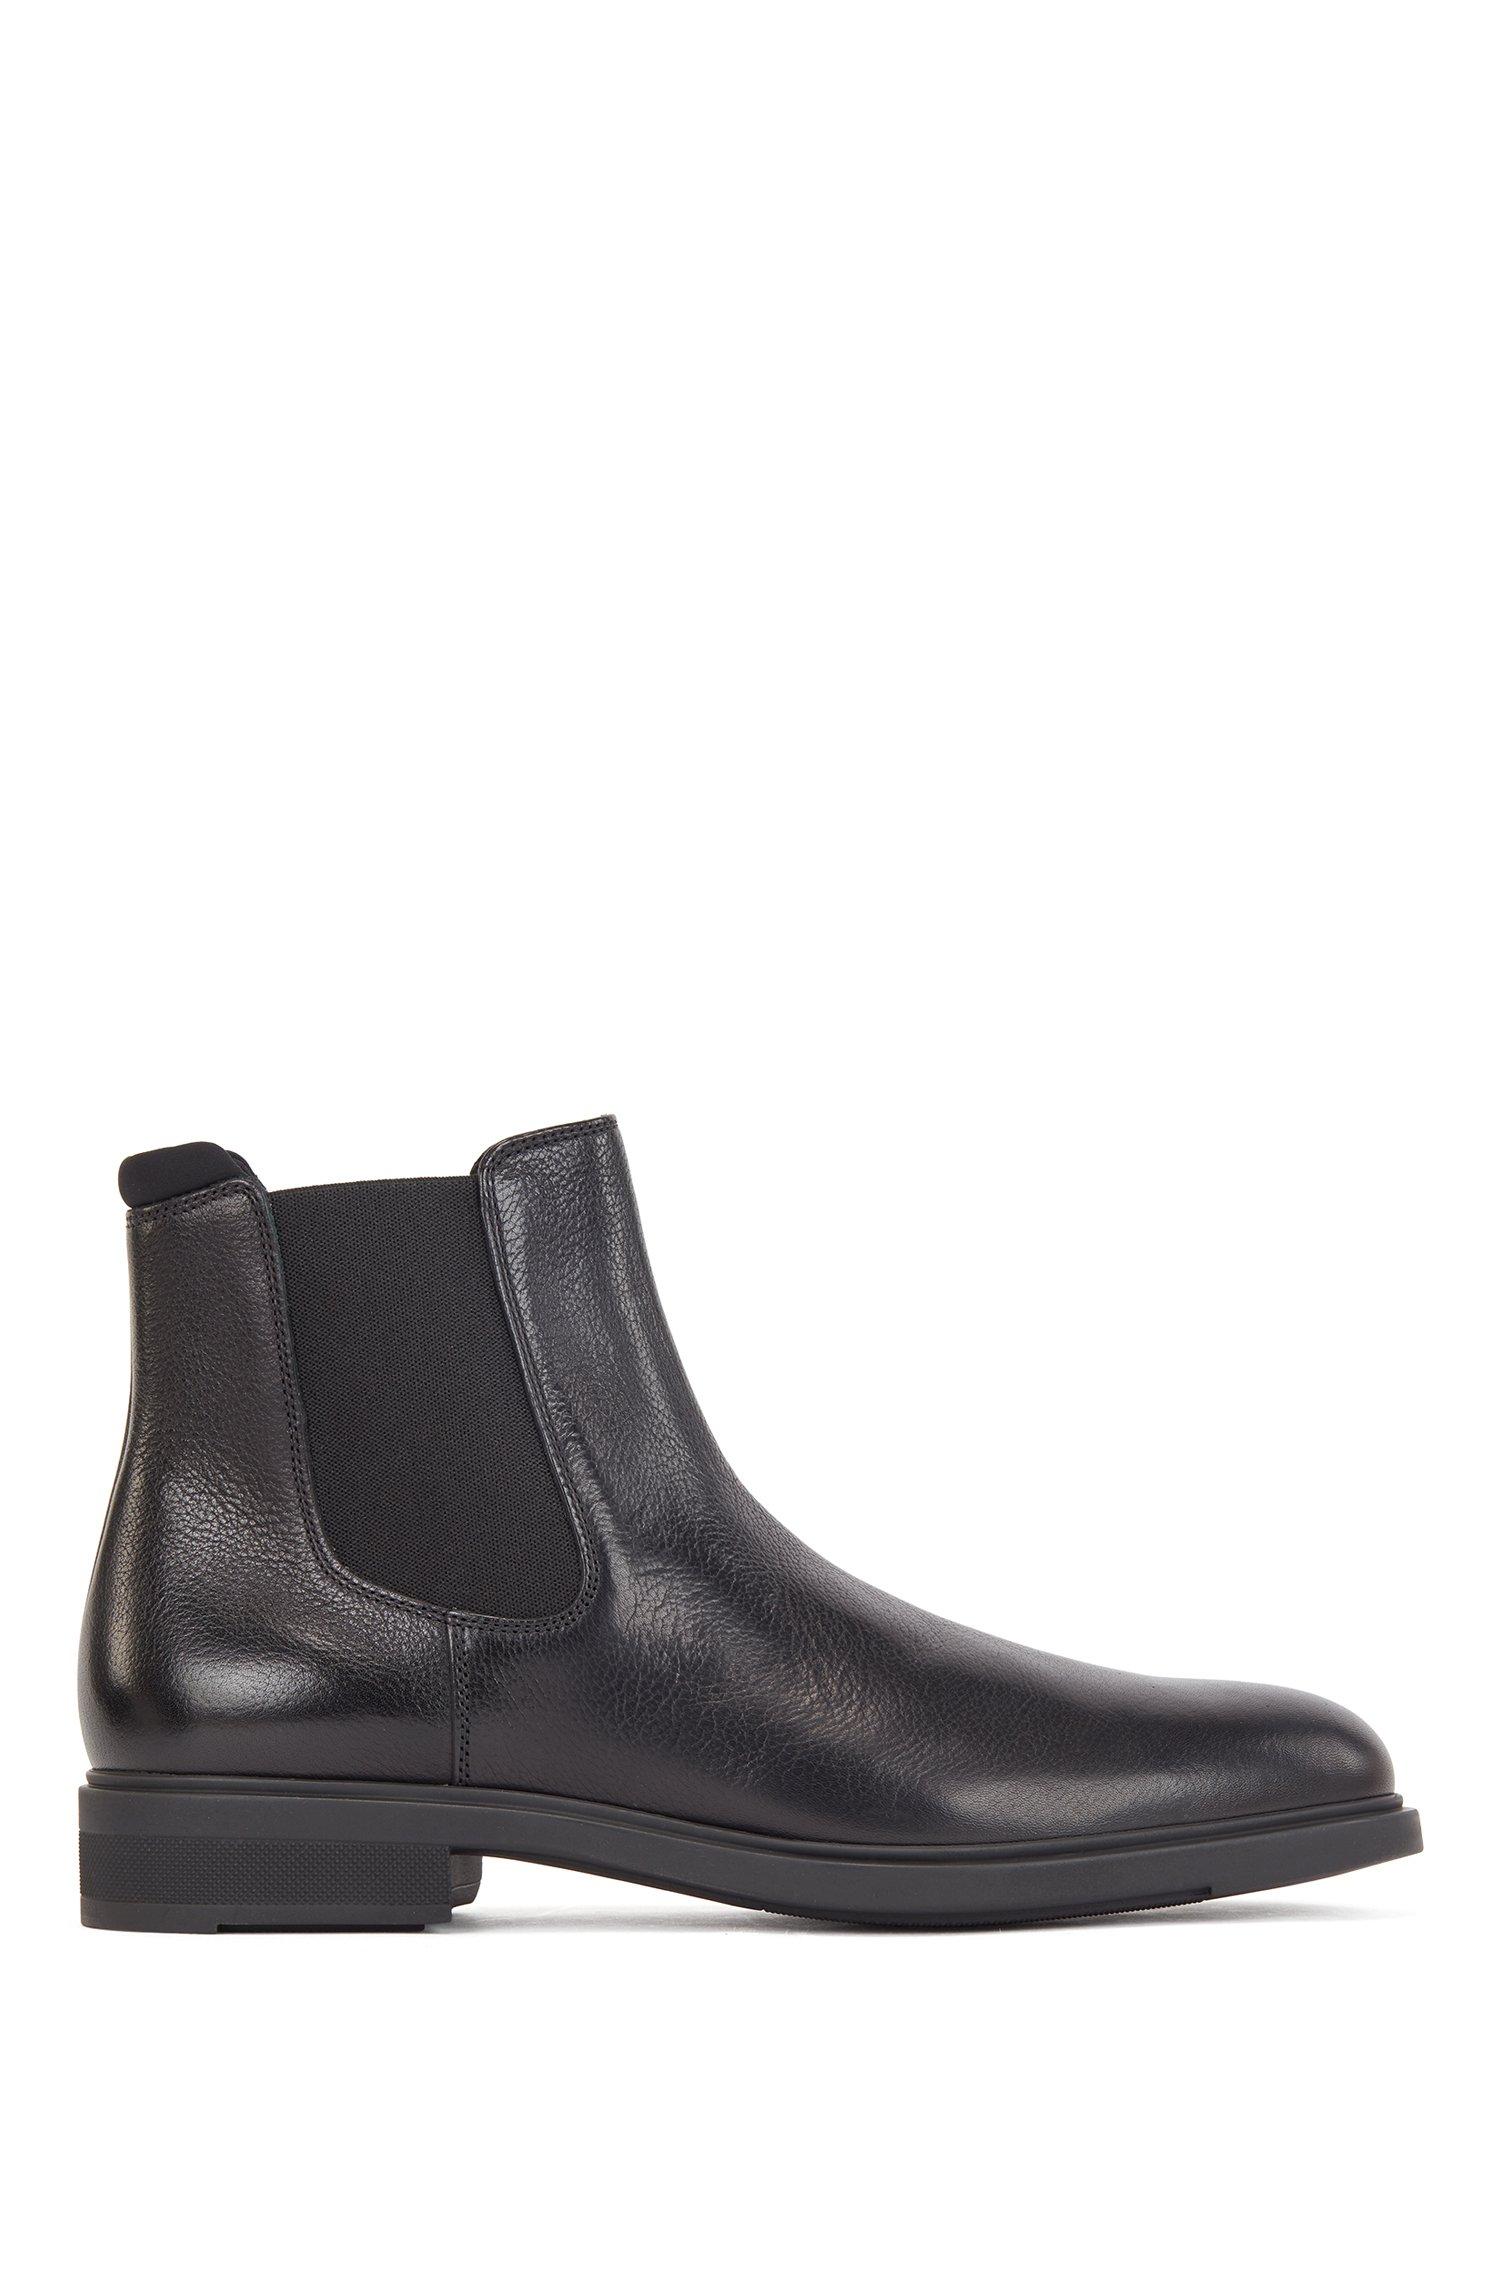 BOSS by Hugo Boss Italian Made Chelsea Boots In Leather With Monogram ...